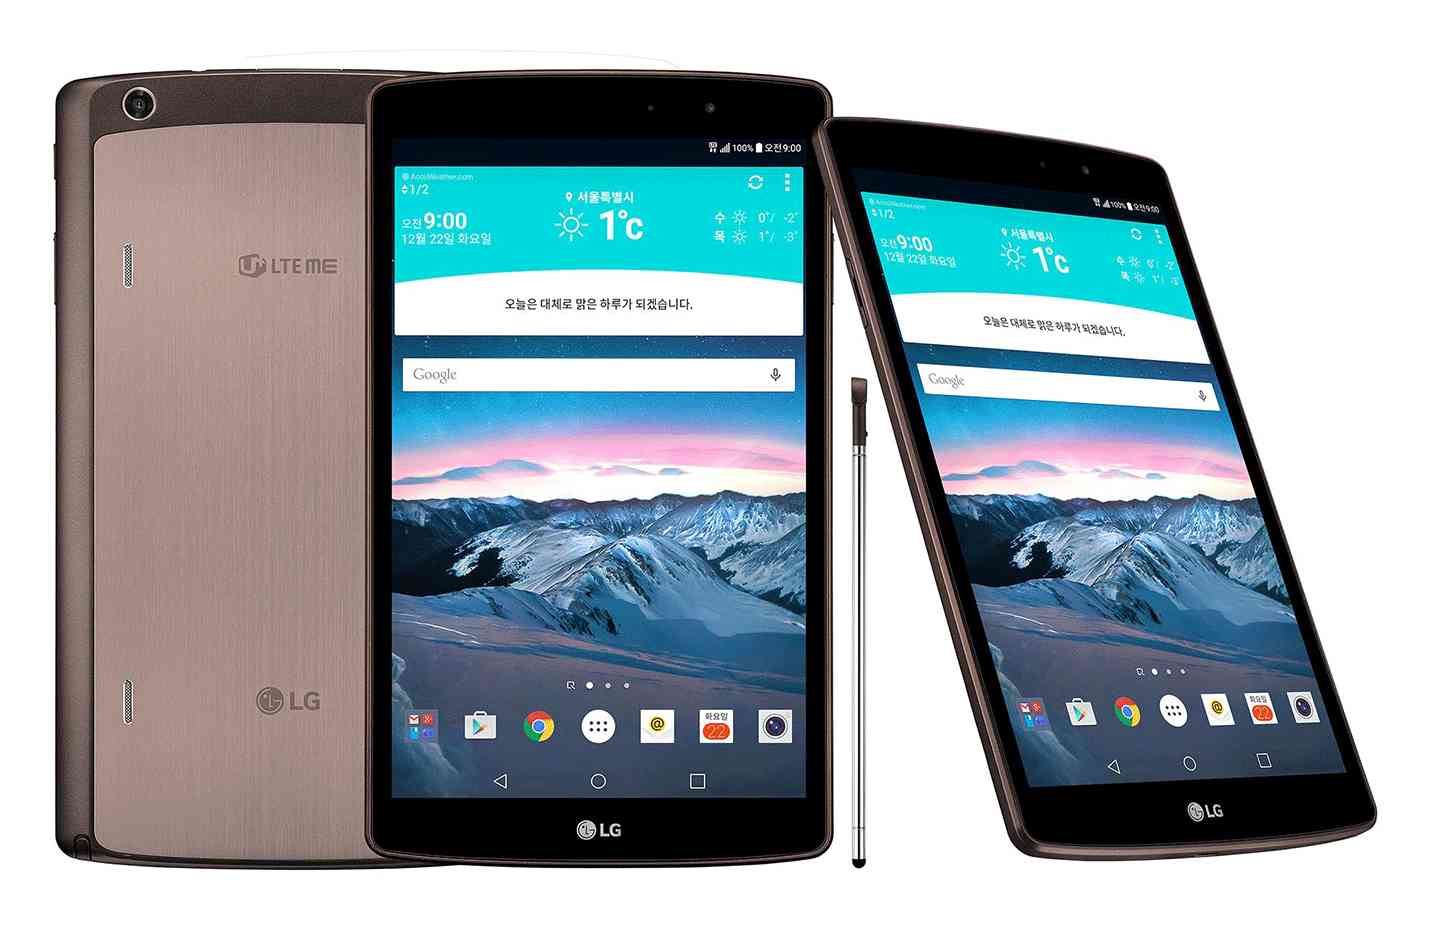 LG G Pad II 8.3 LTE official